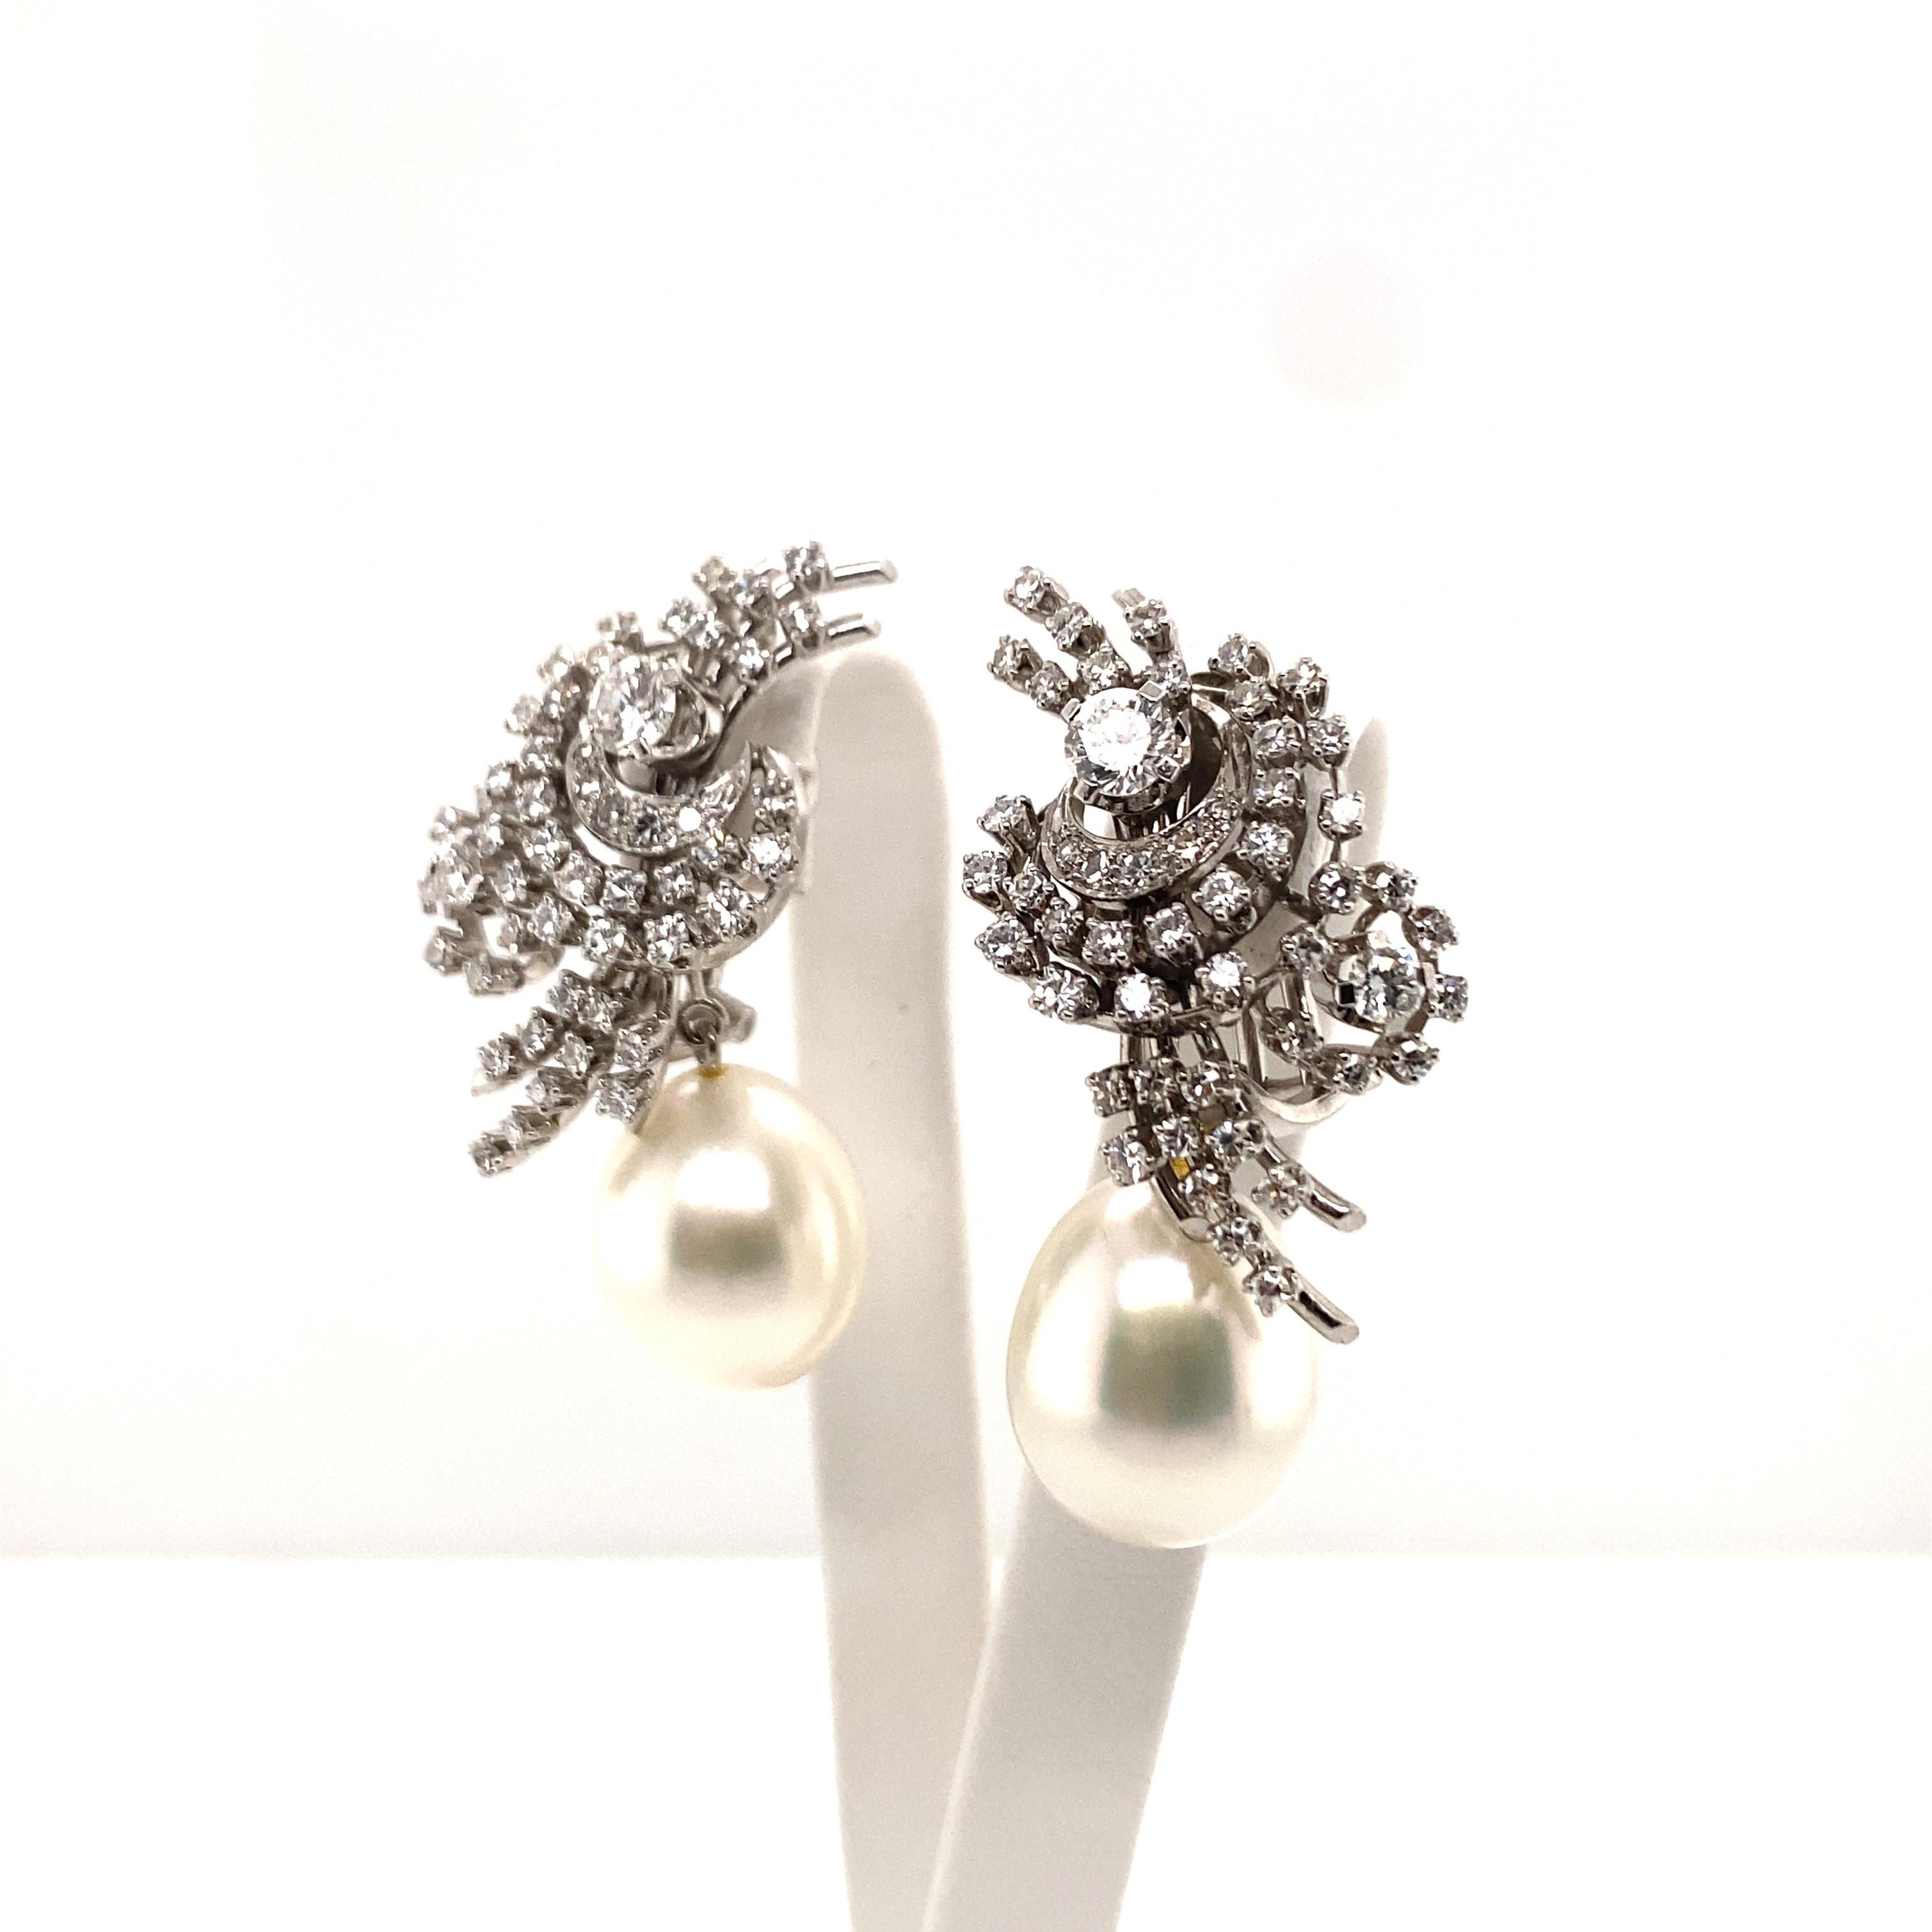 South Sea Cultured Pearl and Diamond Earclips by Bucherer in 18 Karat White Gold 5